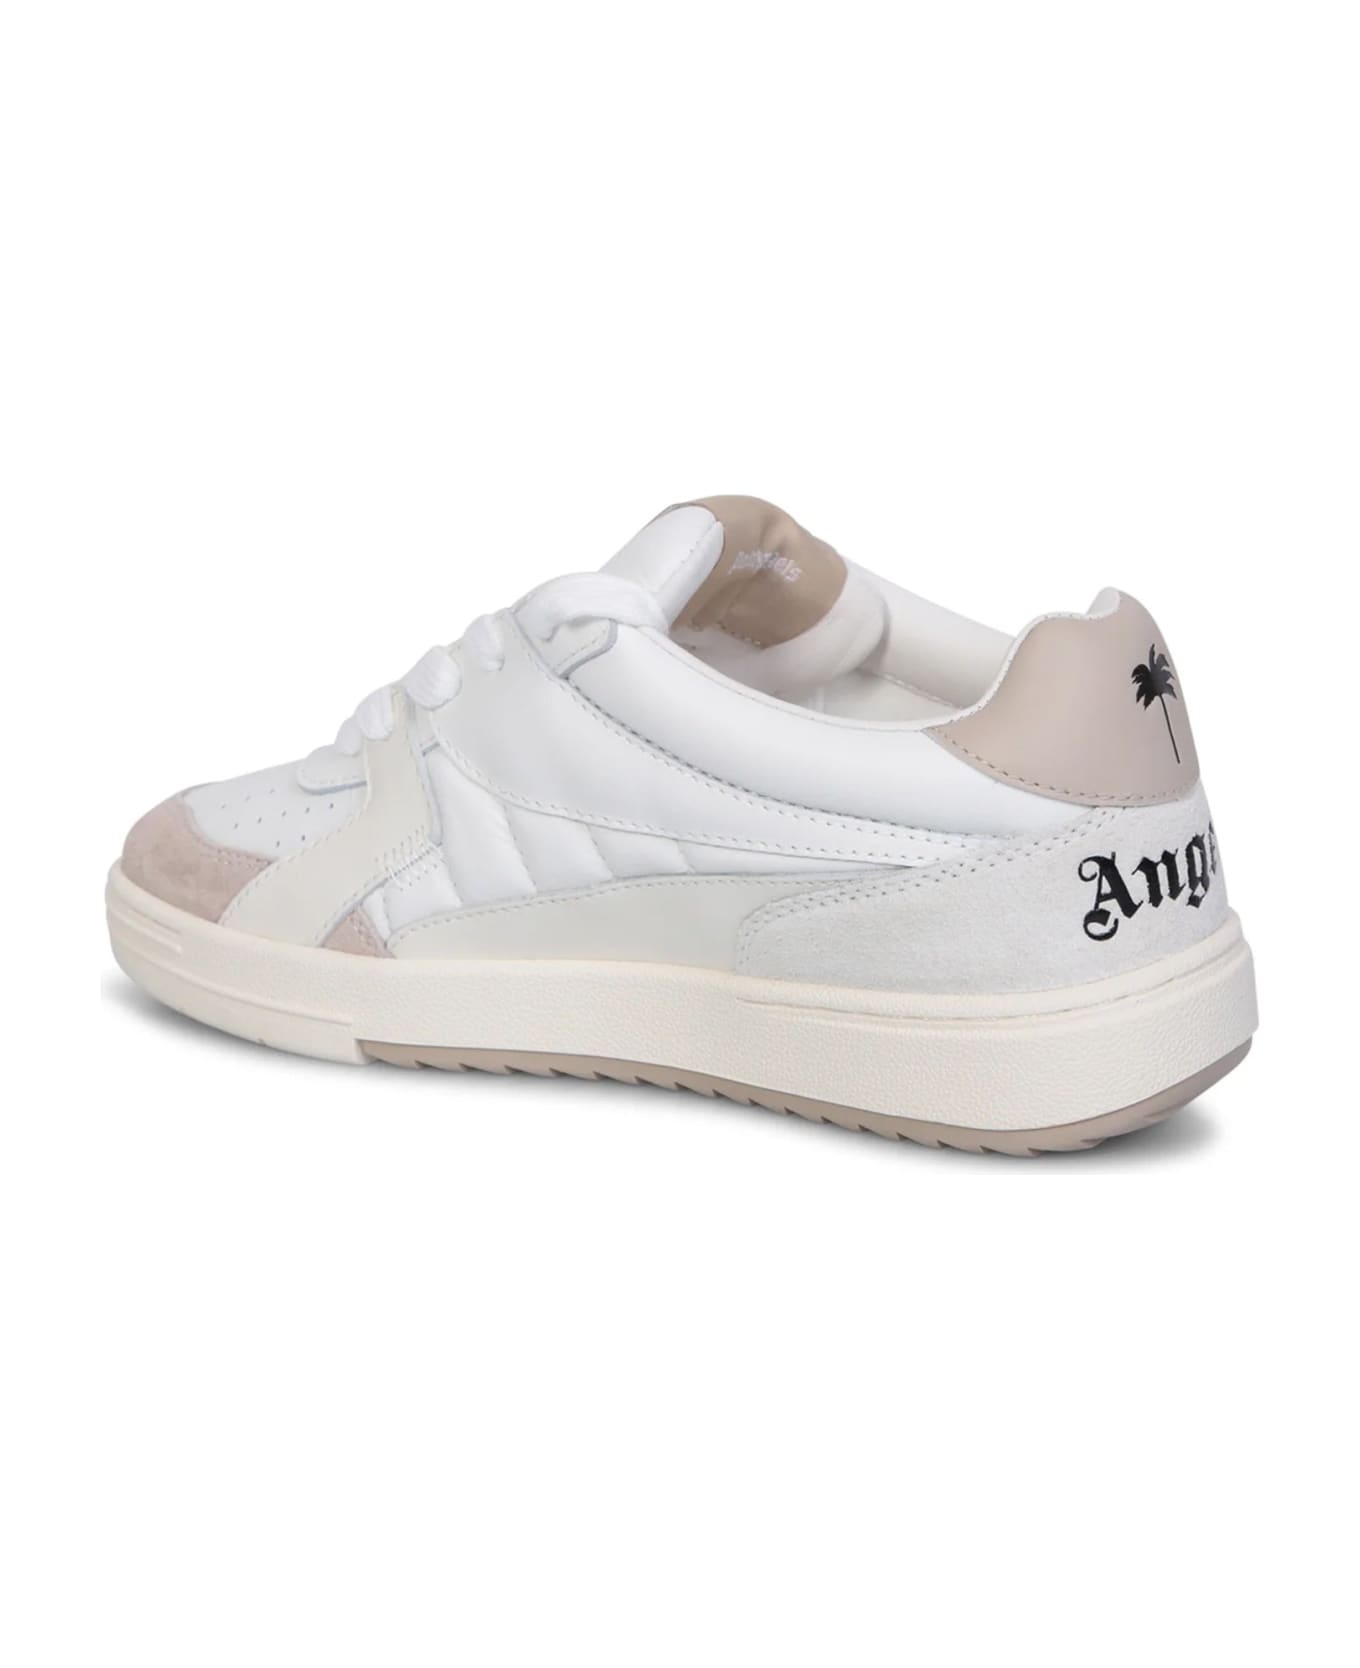 Palm Angels Palm University Sneakers - White スニーカー